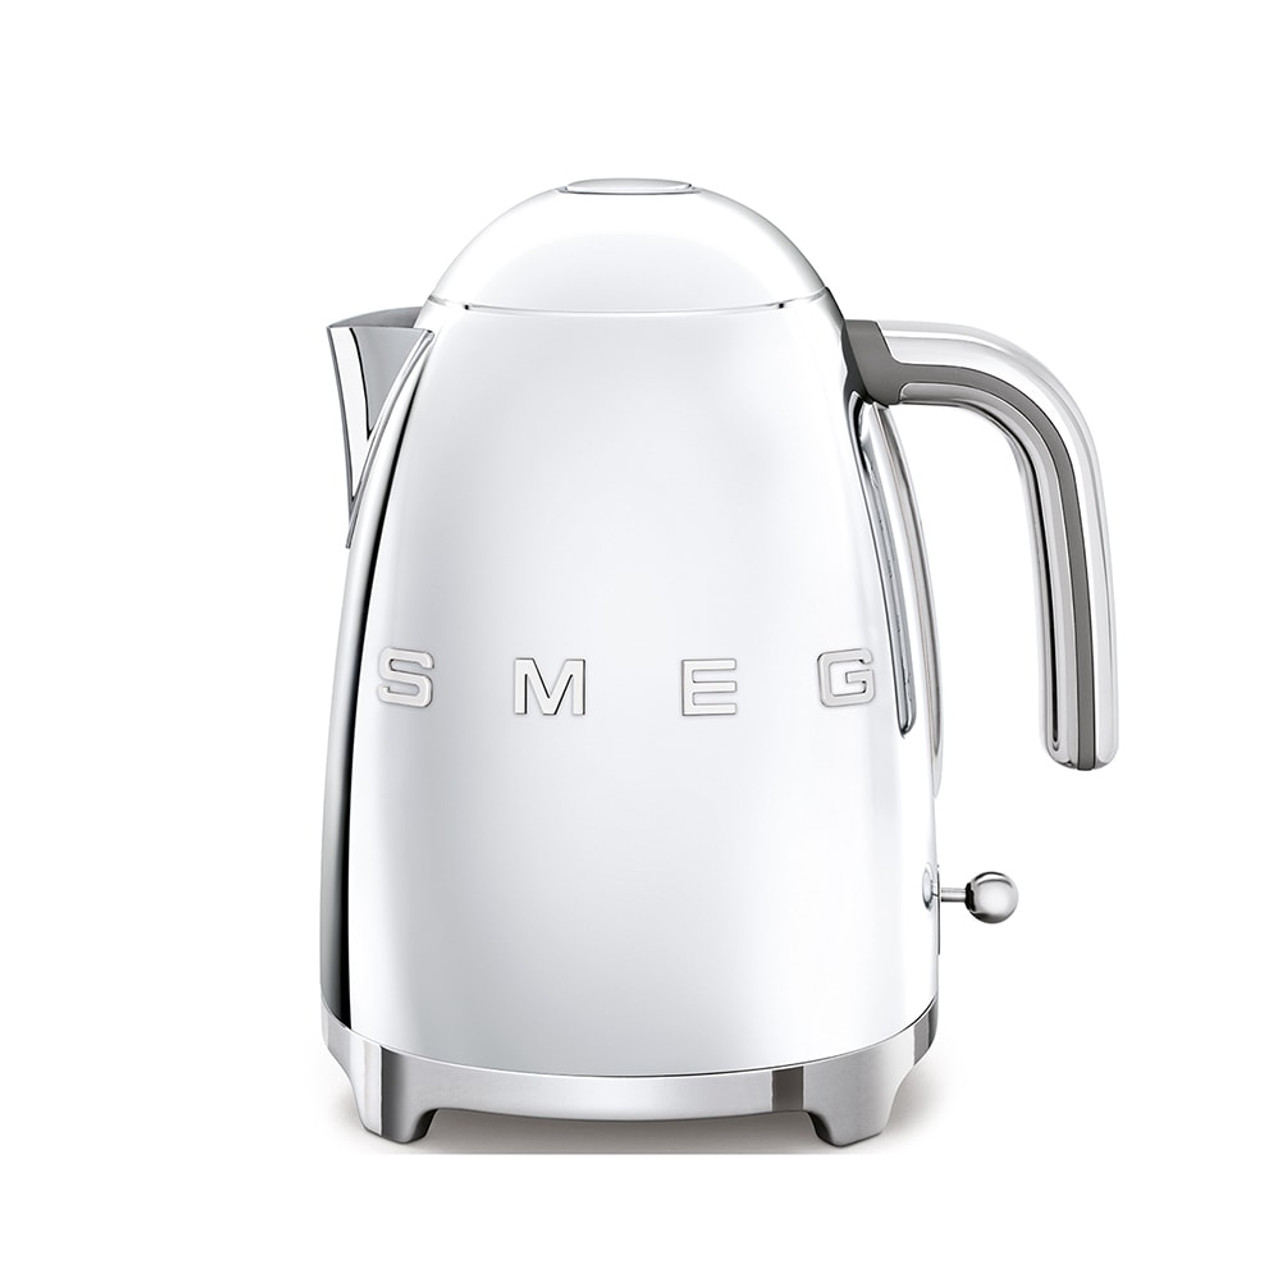 The Smeg Electric Kettle Is 21% Off for Prime Big Deal Days